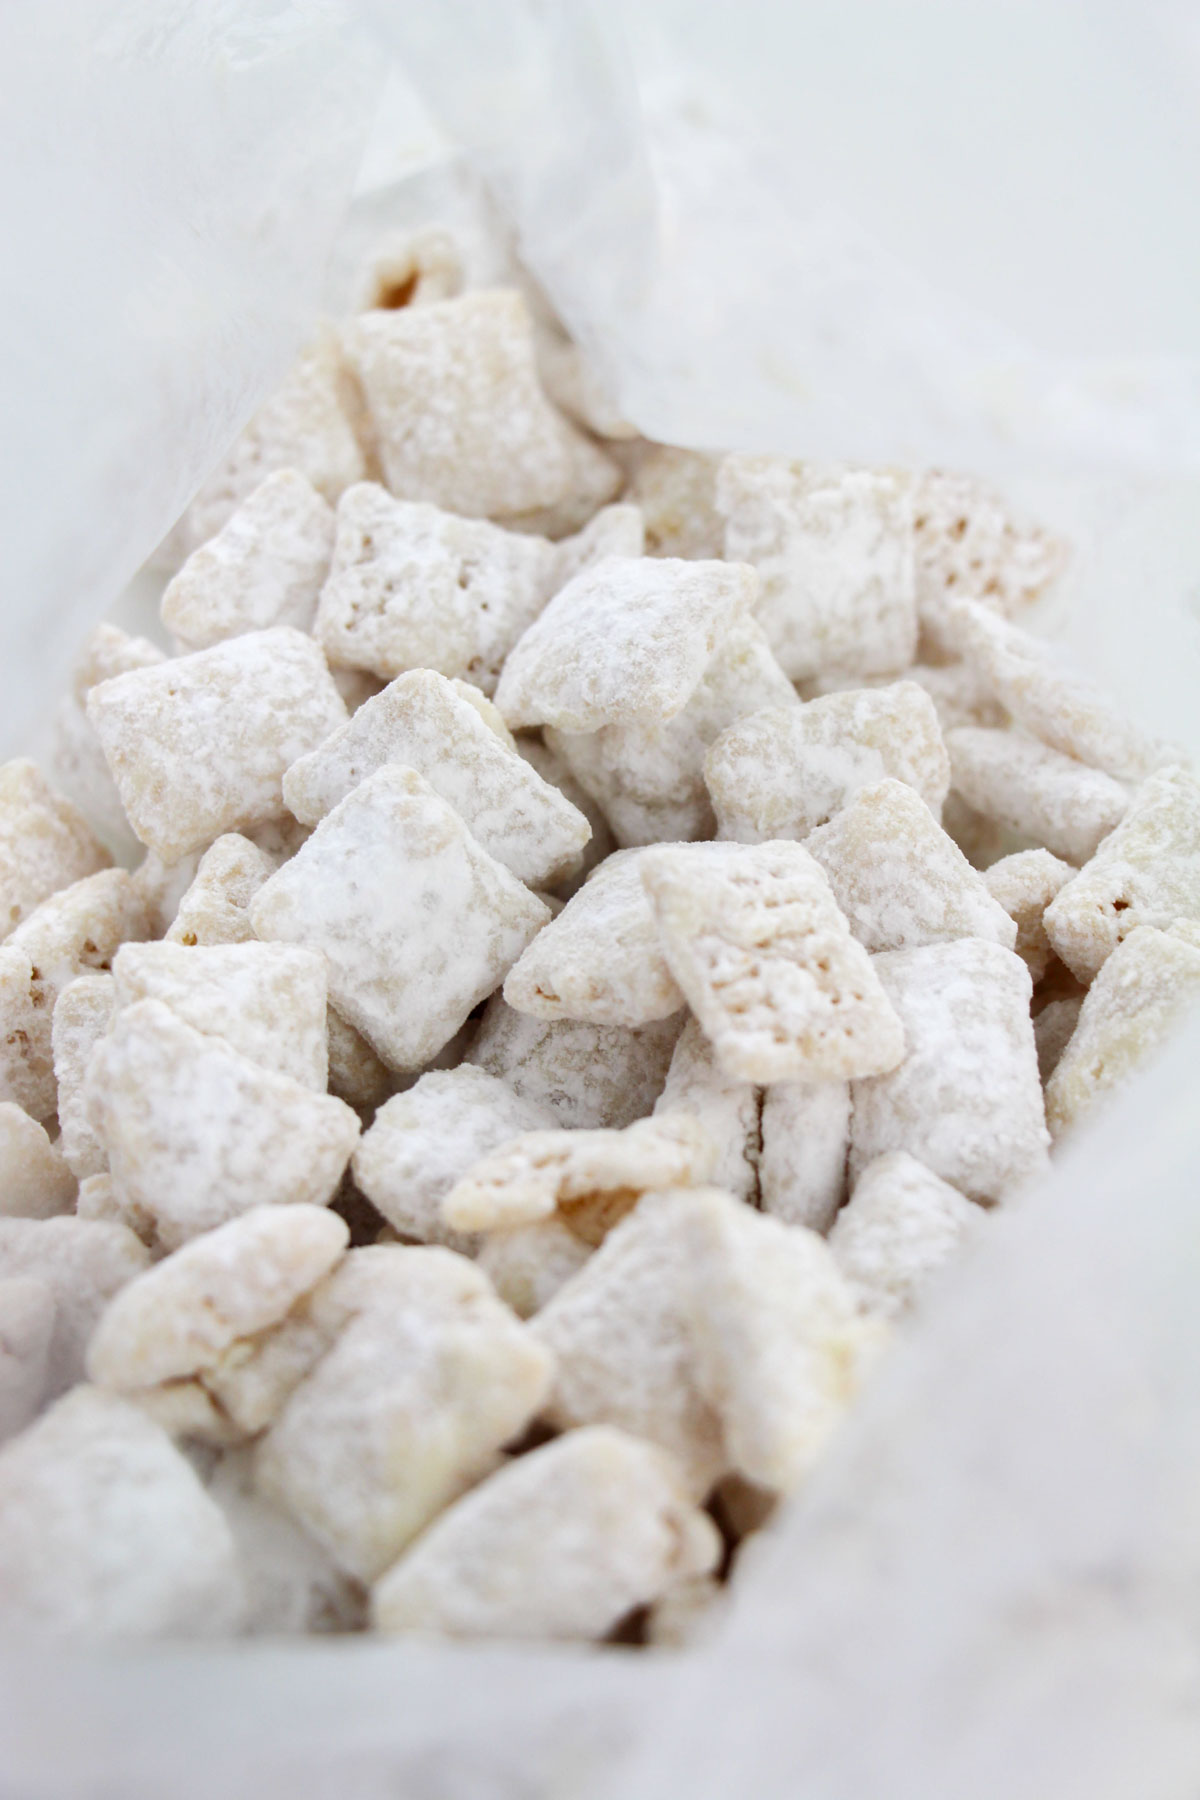 A bag of white powdered chex mix on a white surface.